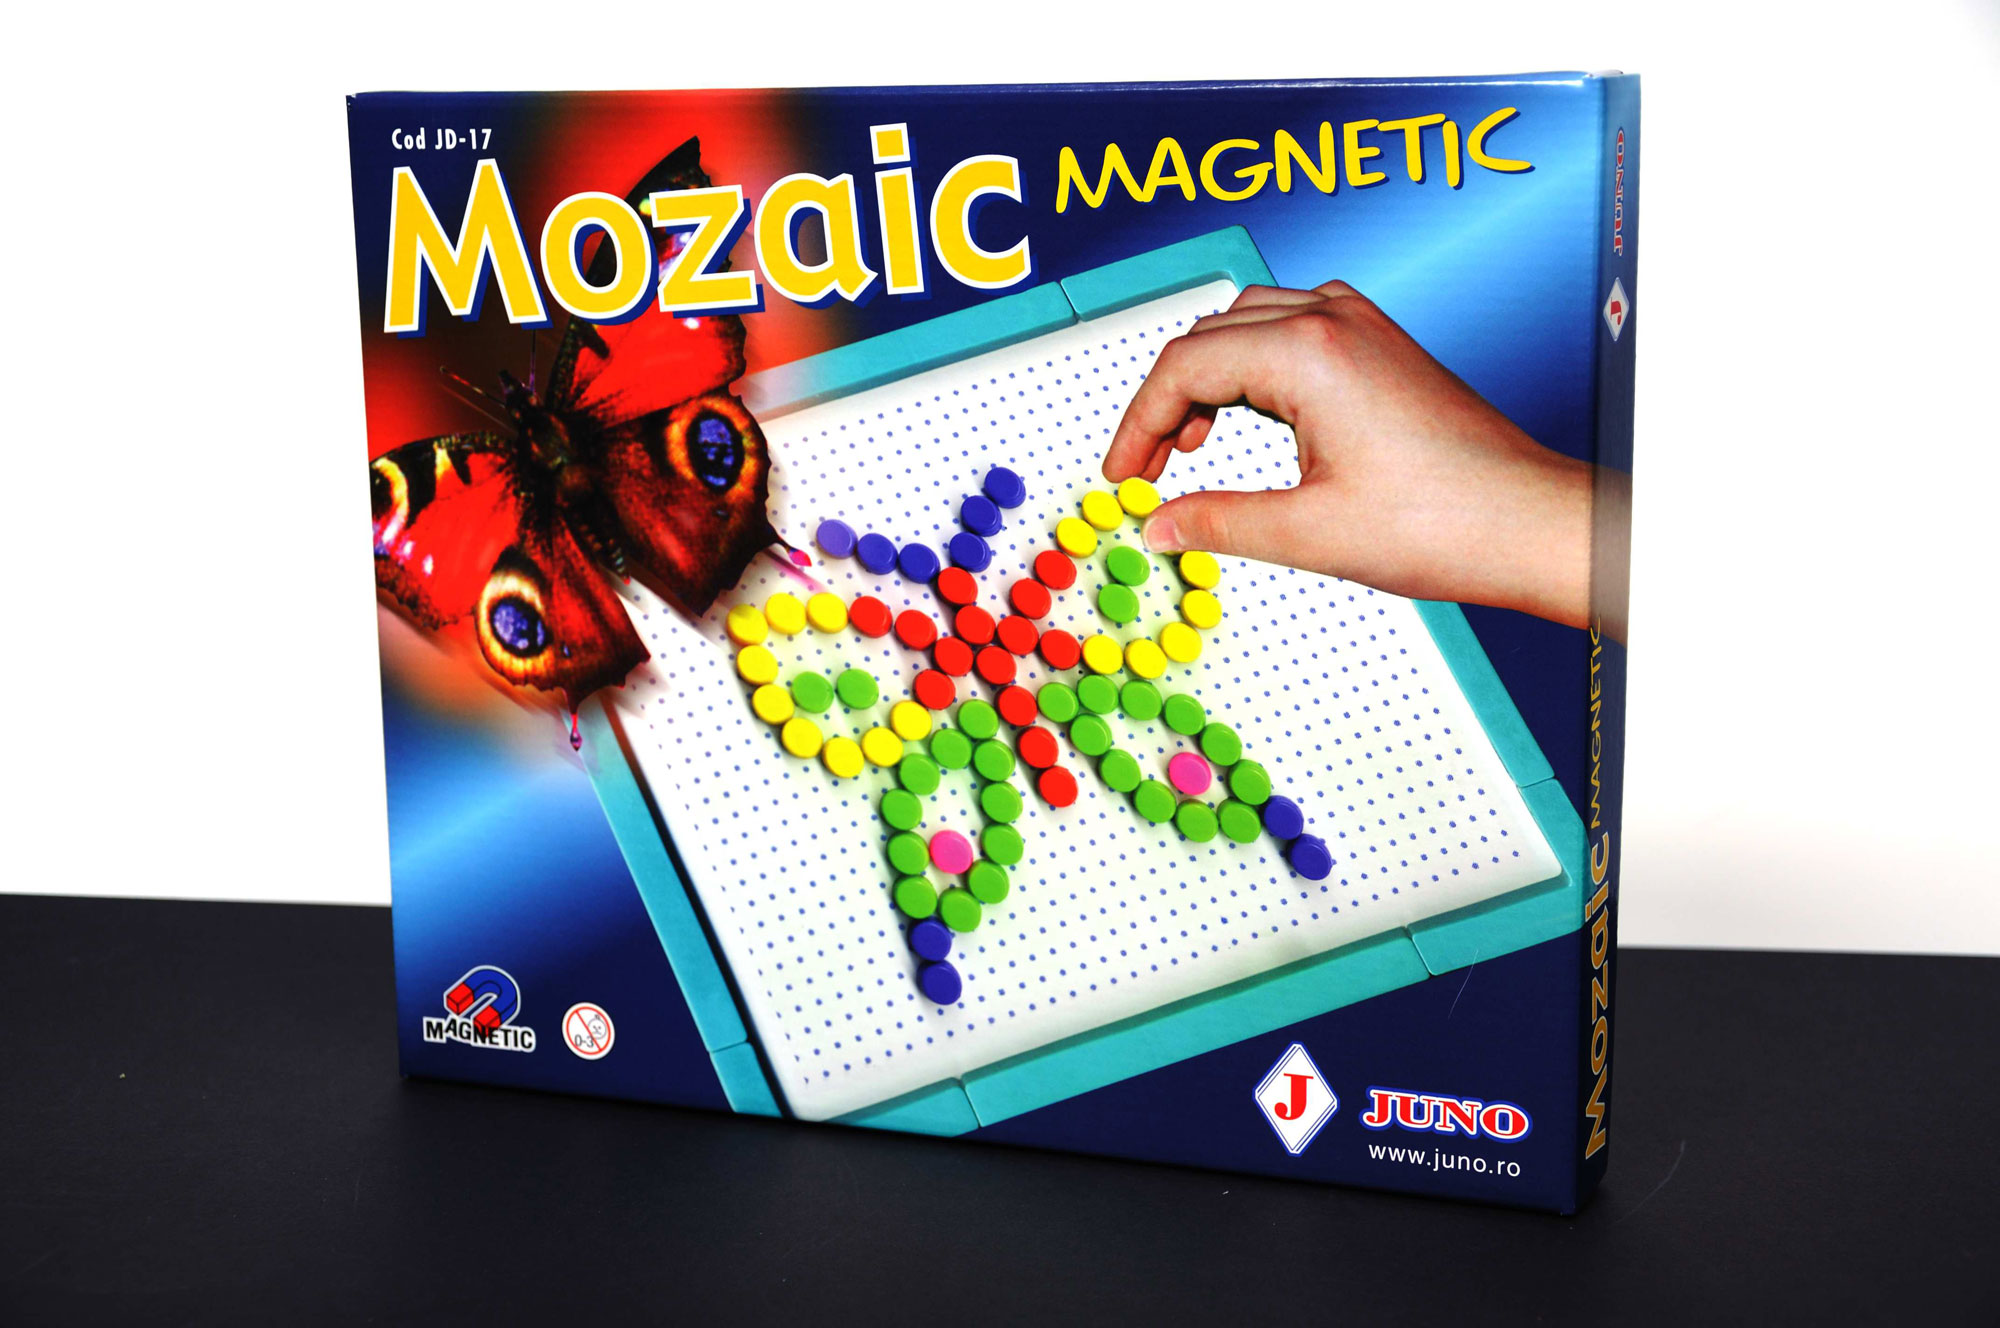 MOZAIC magnetic